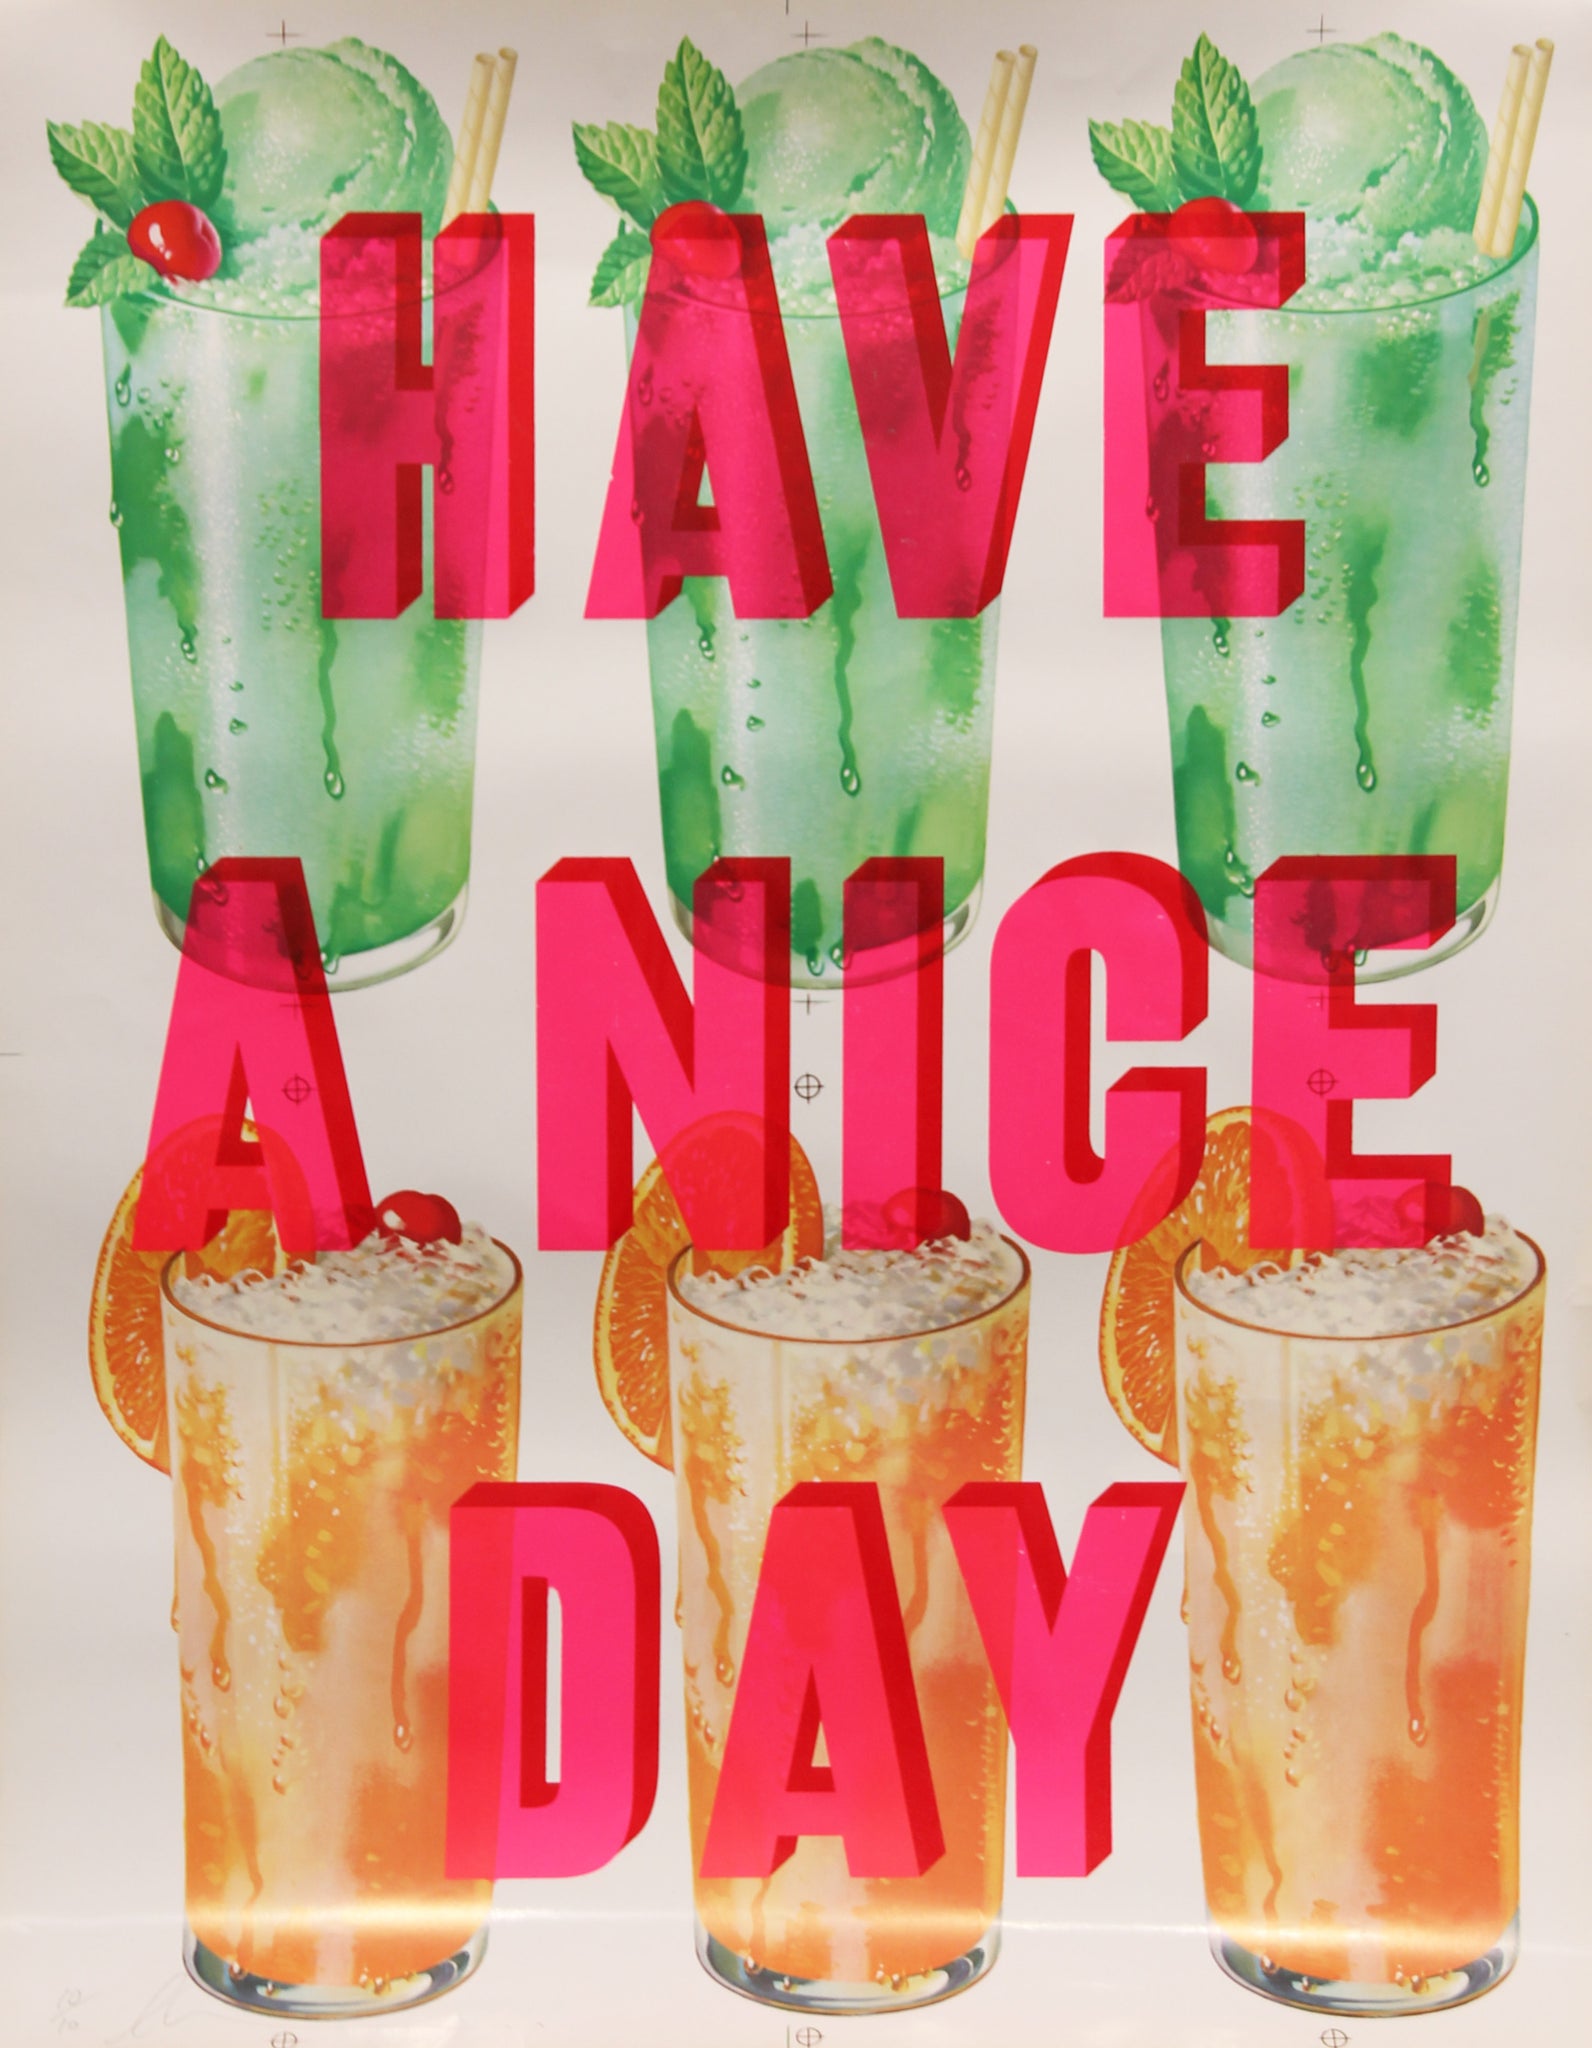 Have A Nice Day - Ice Cream Floats (Orange/Green)